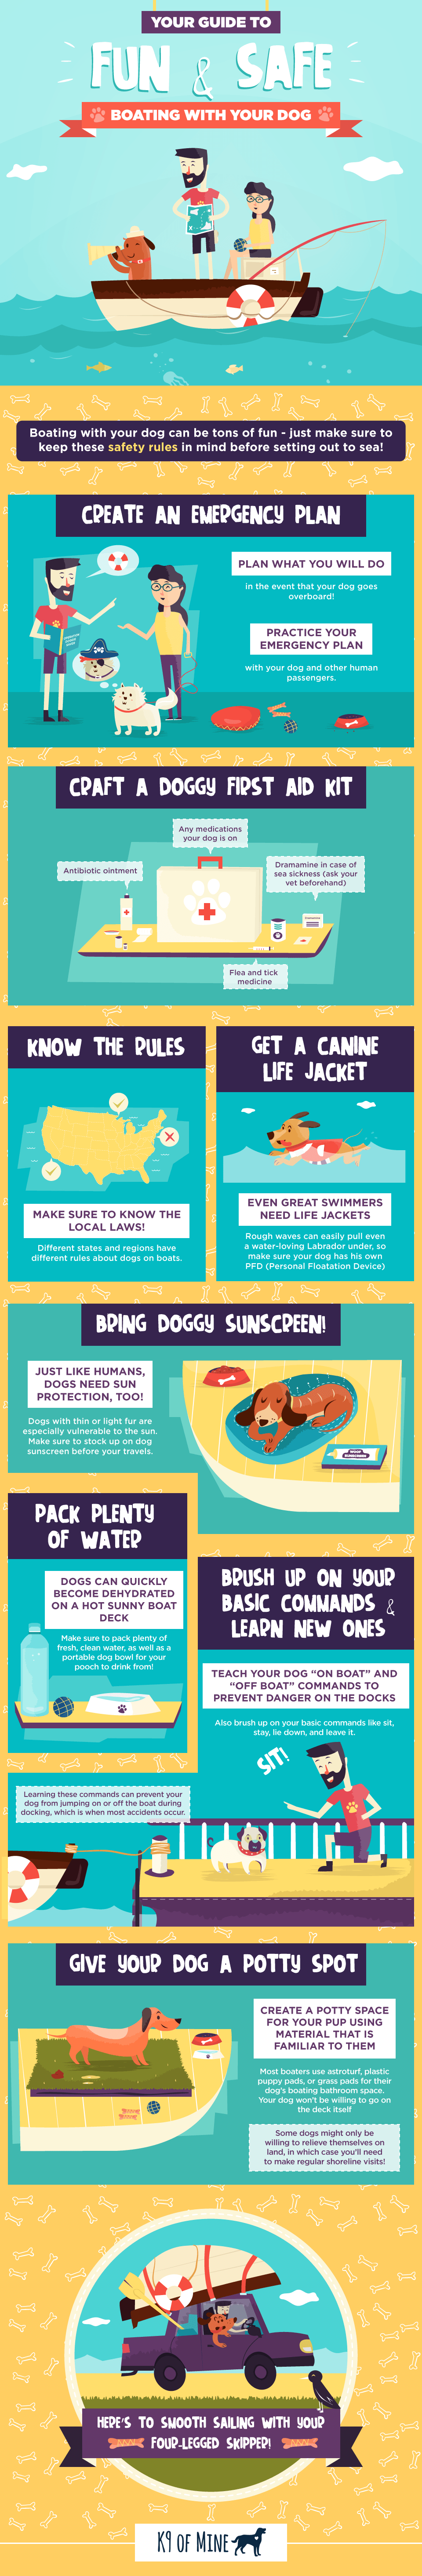 How to Keep Your Dog Safe While Boating this Summer